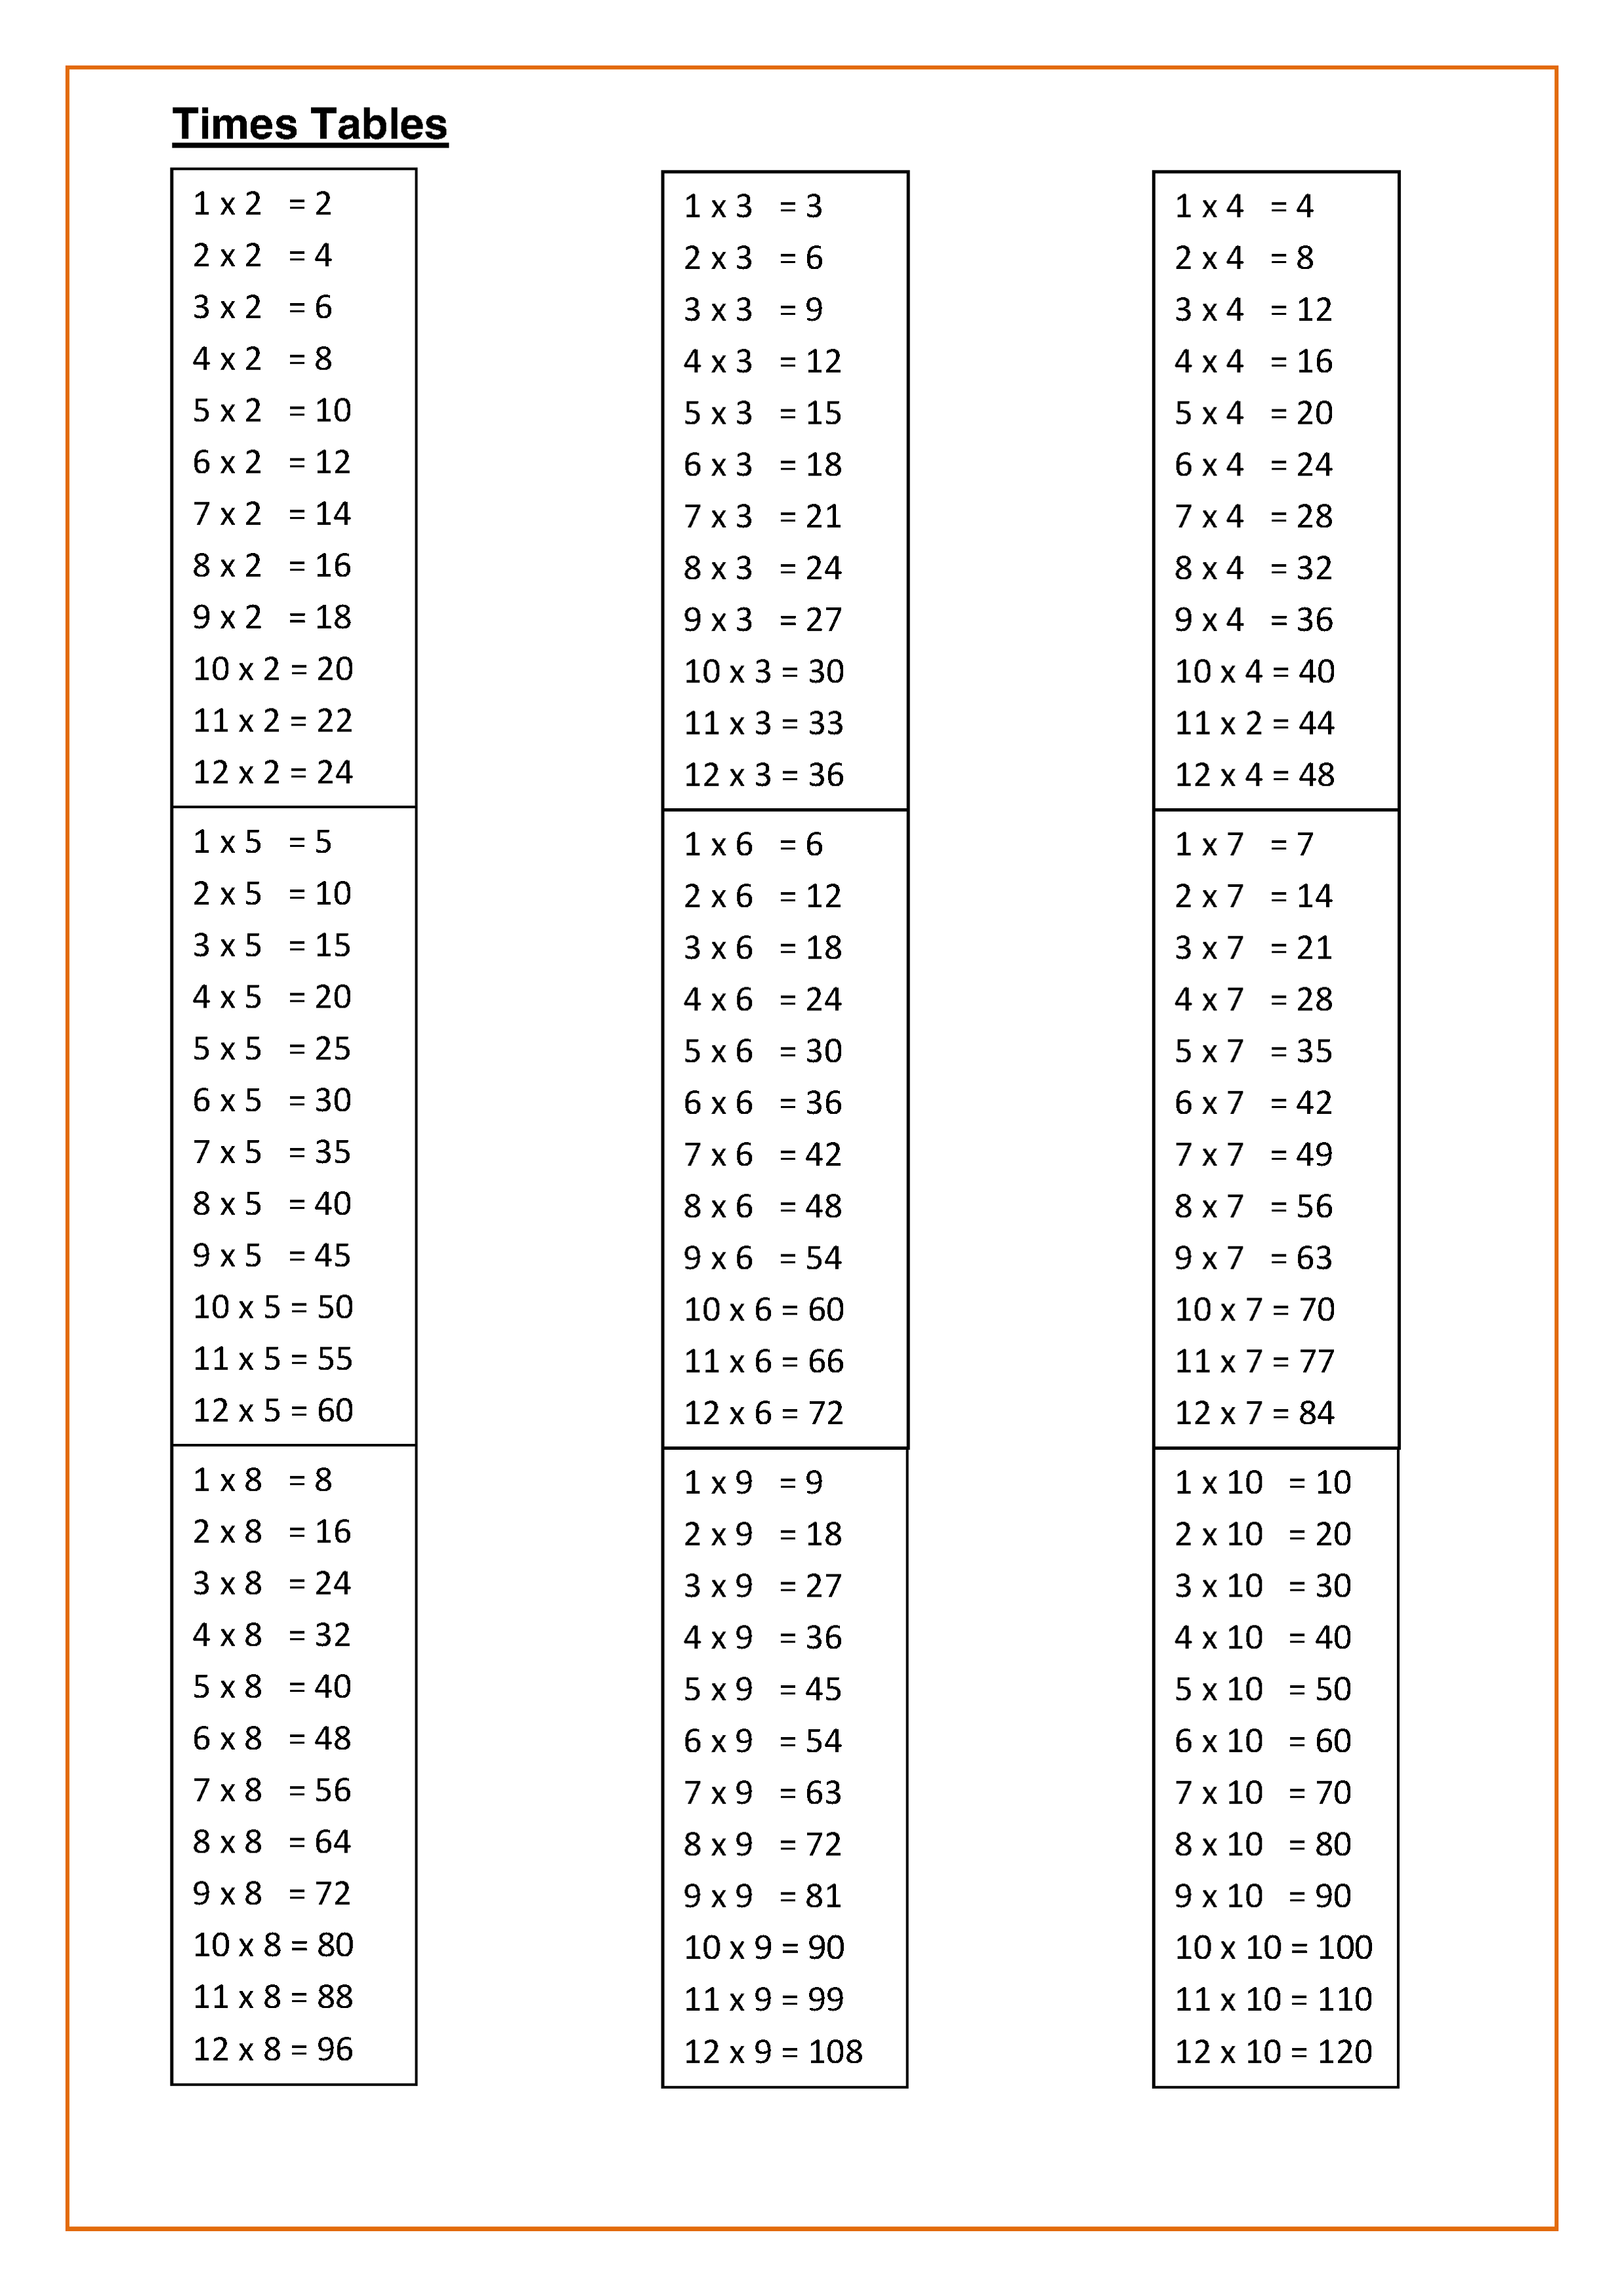 1 times tables worksheet for school